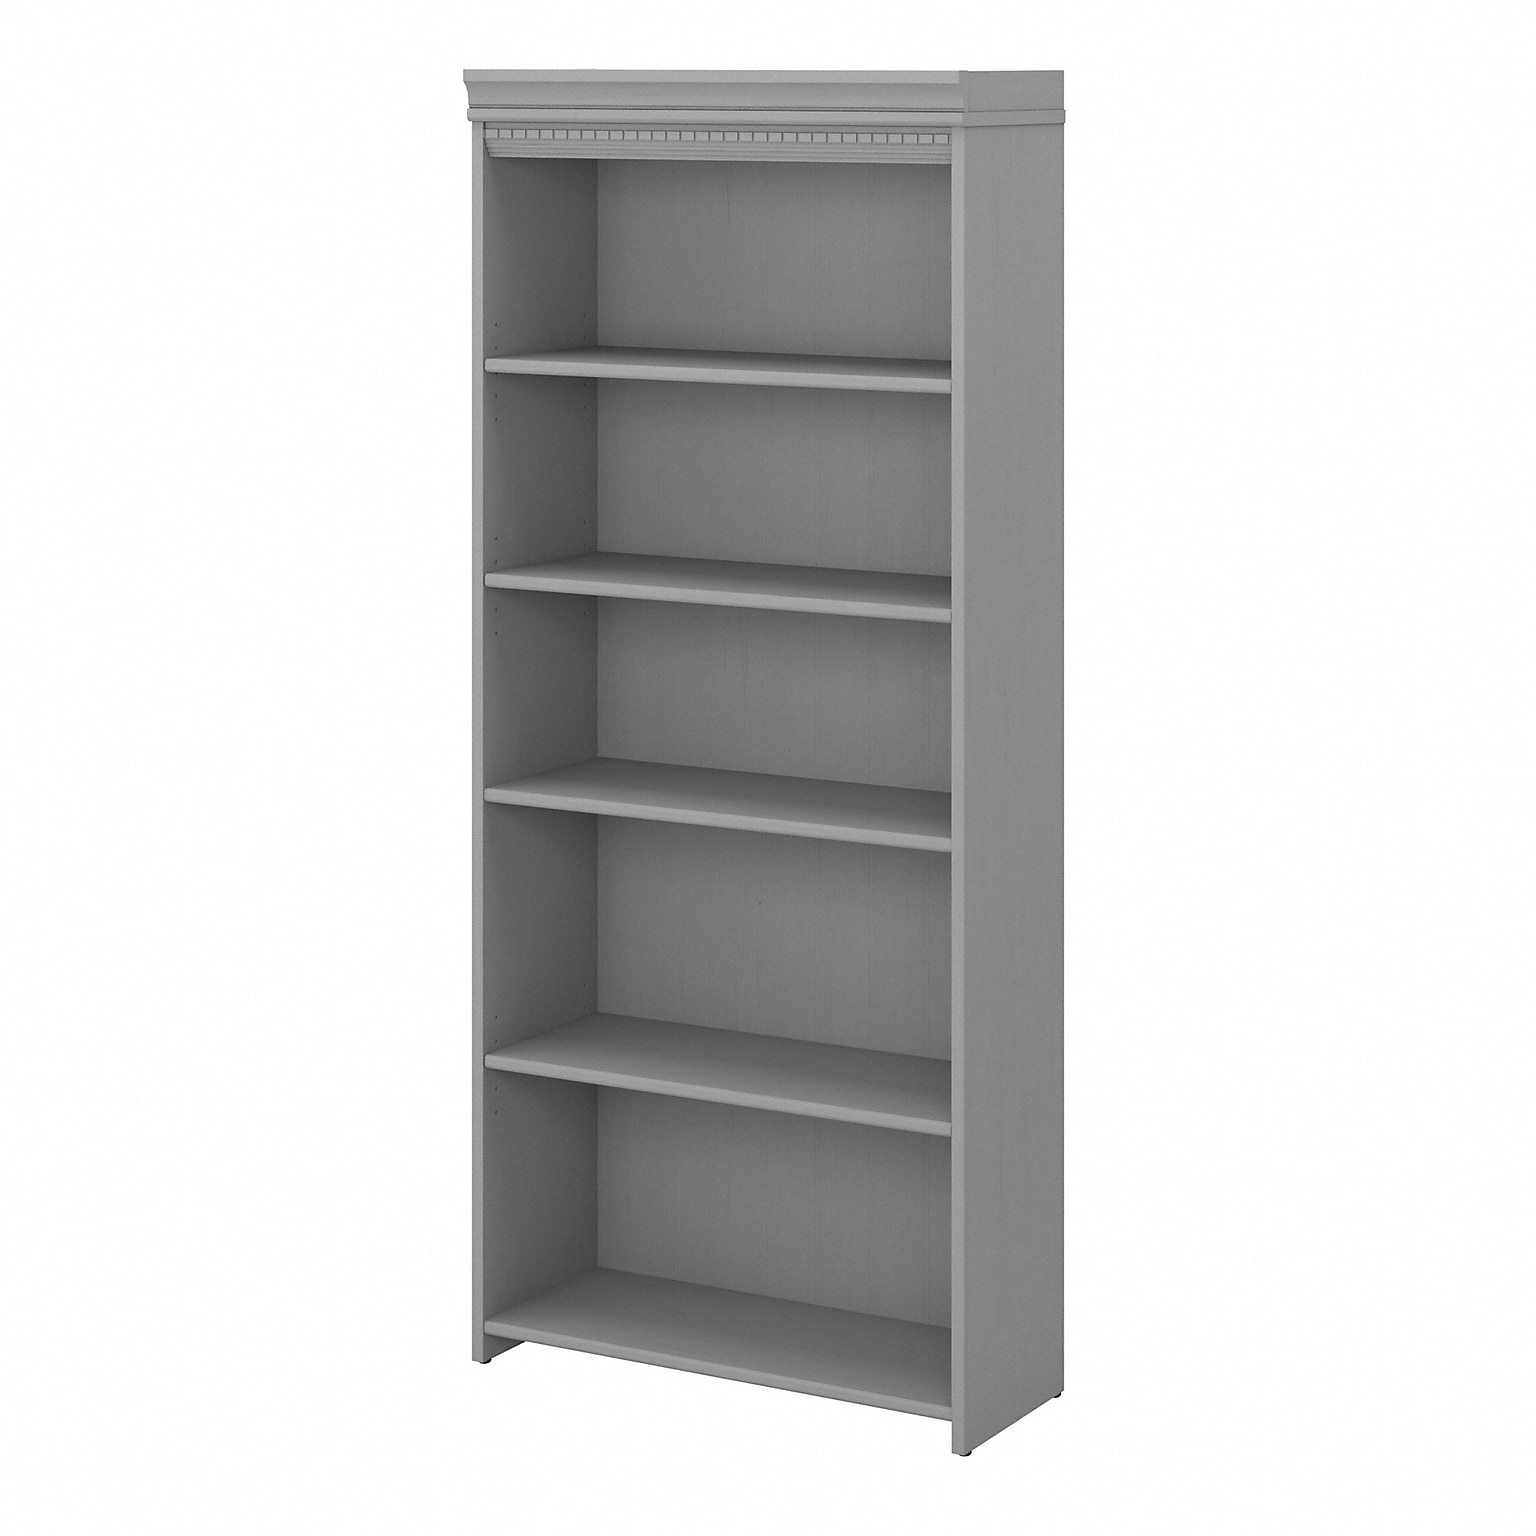 Bush Furniture Fairview 69H 5-Shelf Bookcase with Adjustable Shelves, Cape Cod Gray Laminated Wood (WC53565-03)